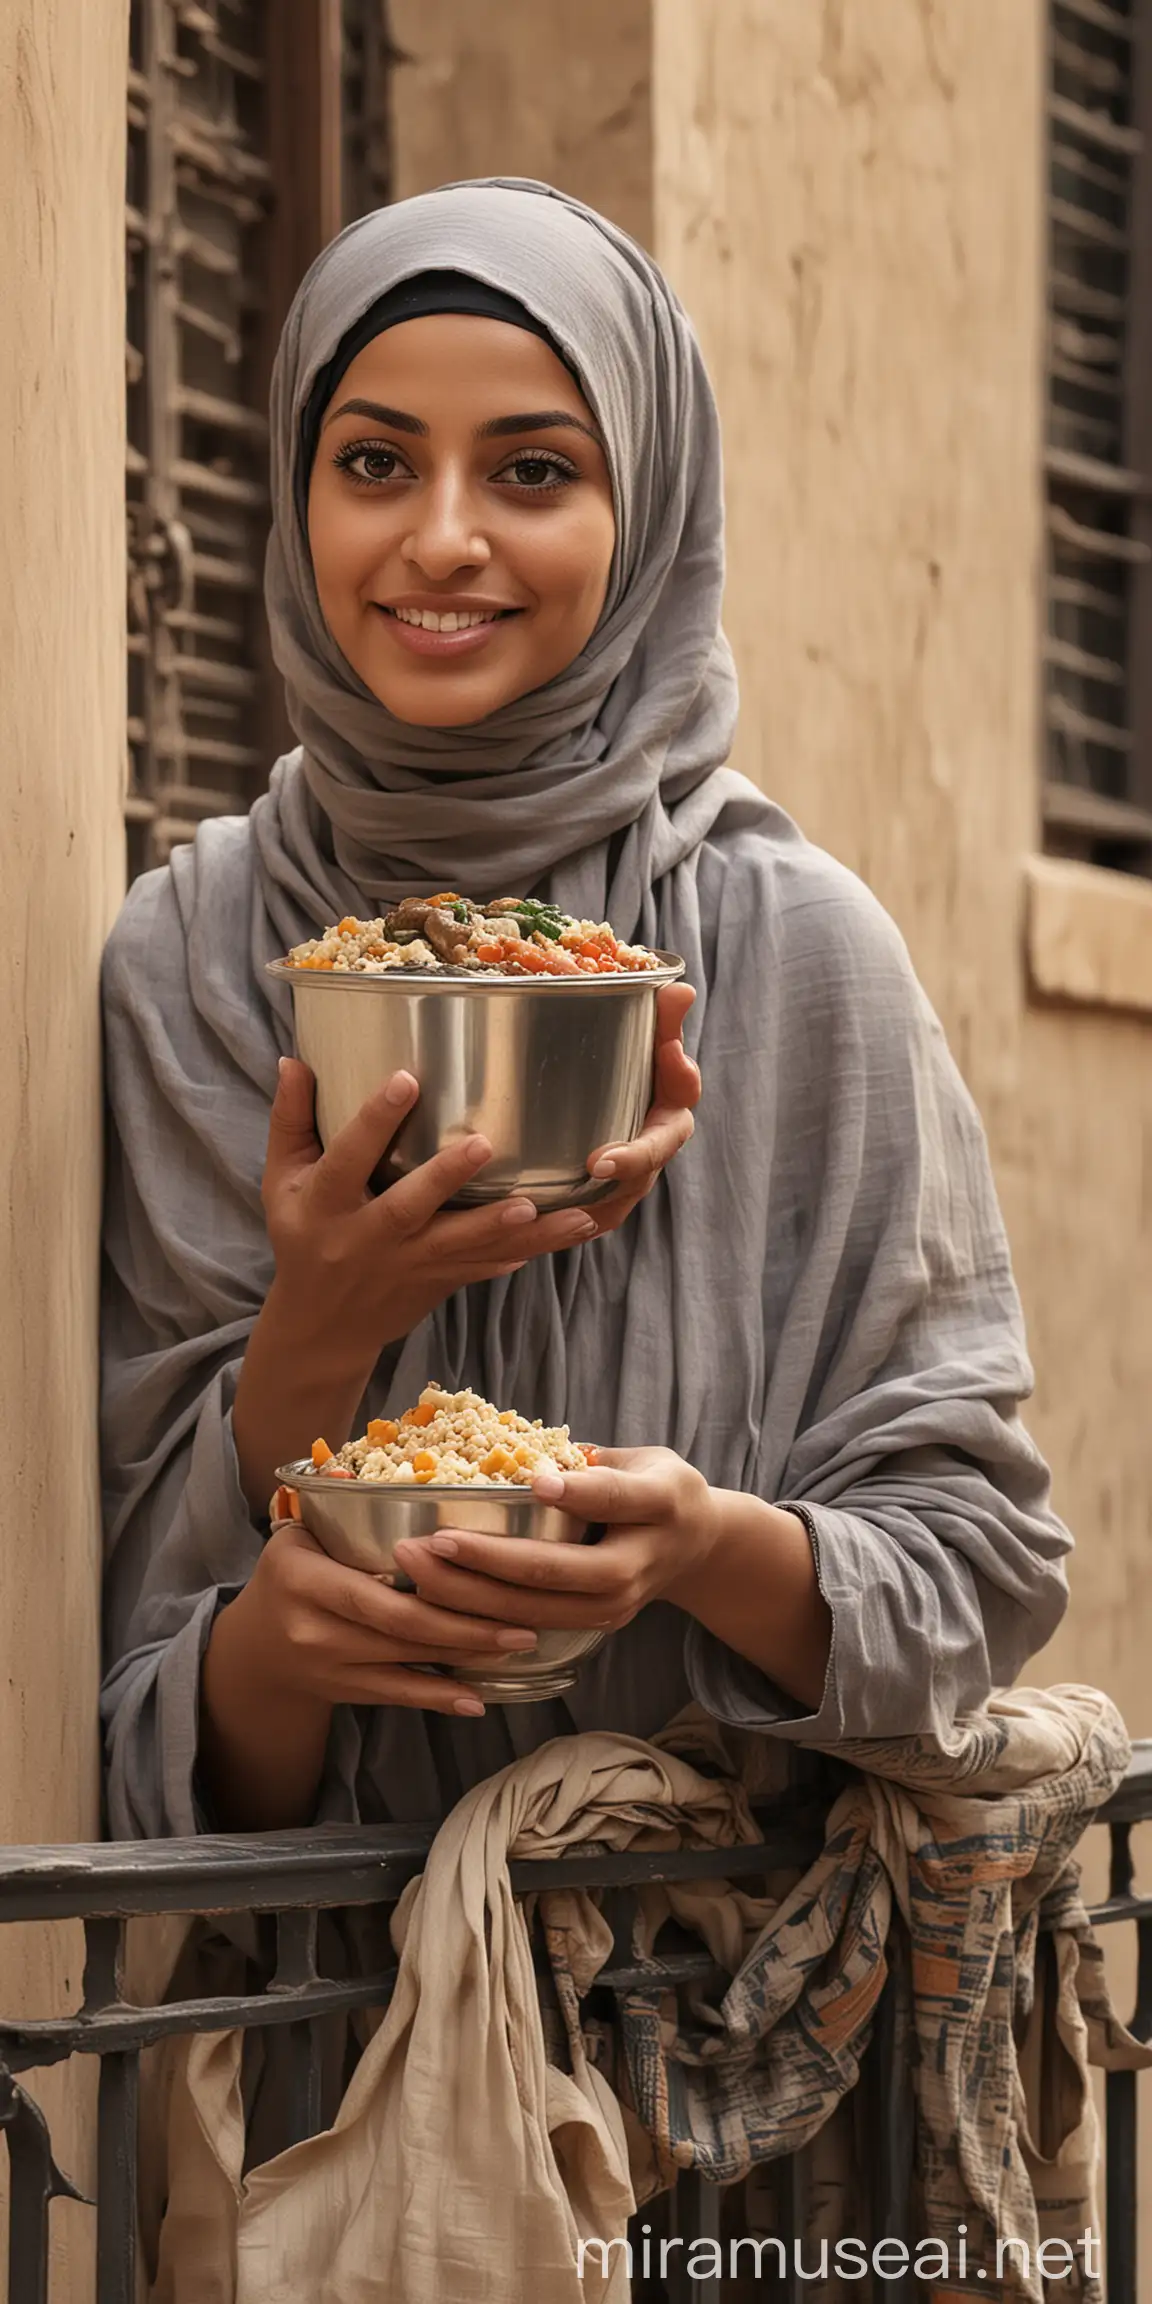 Modern Egyptian Woman in Hijab Passing Food Pot Over Balcony